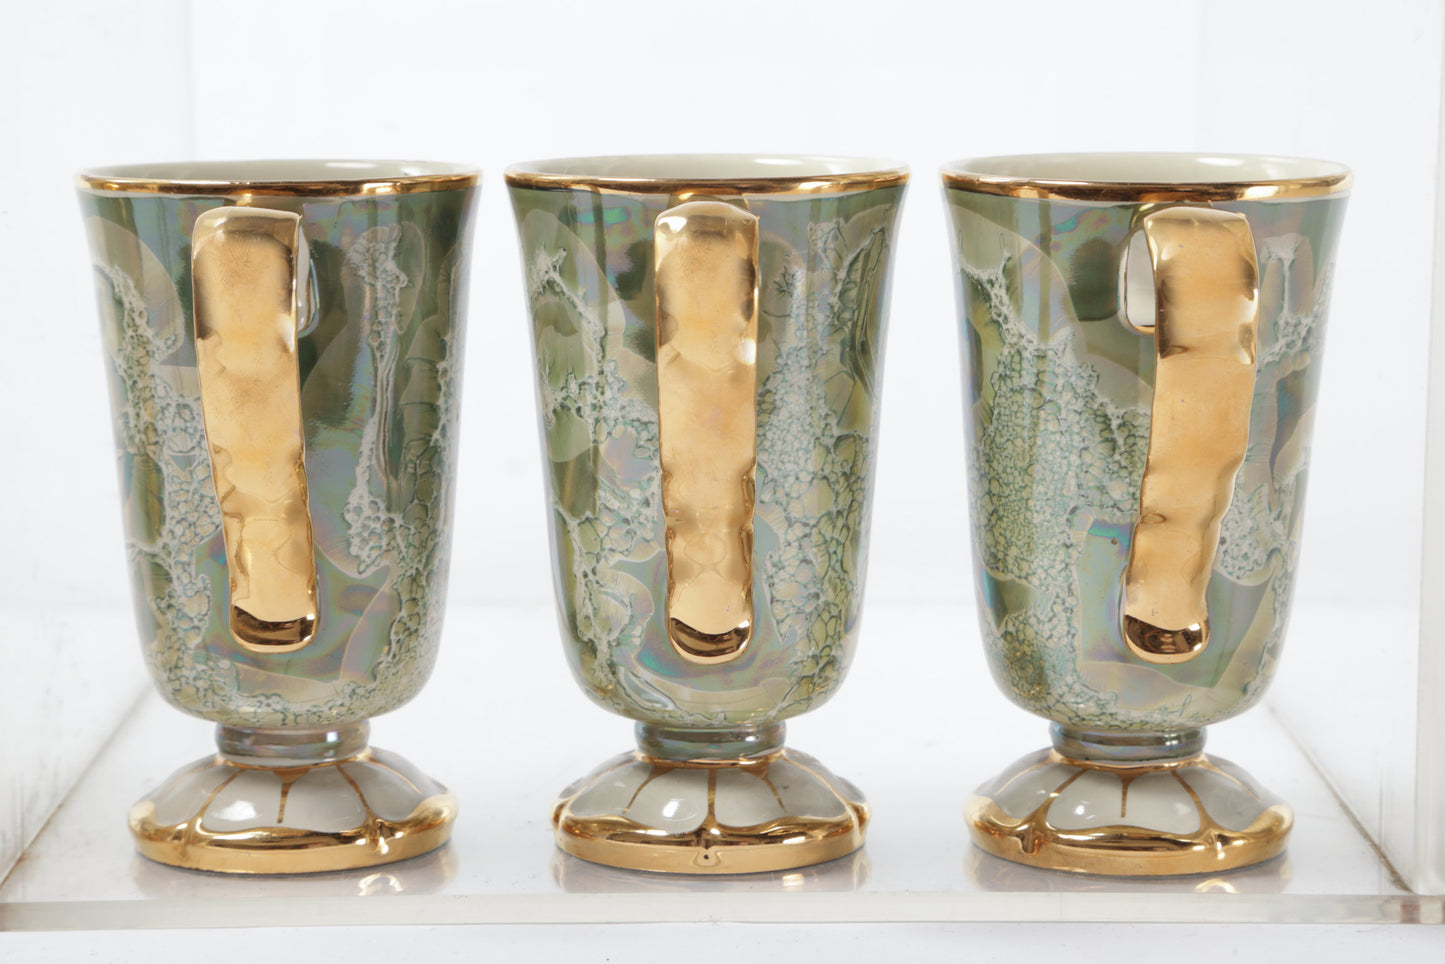 Goblet set with marbled ceramic jug from the 1950s